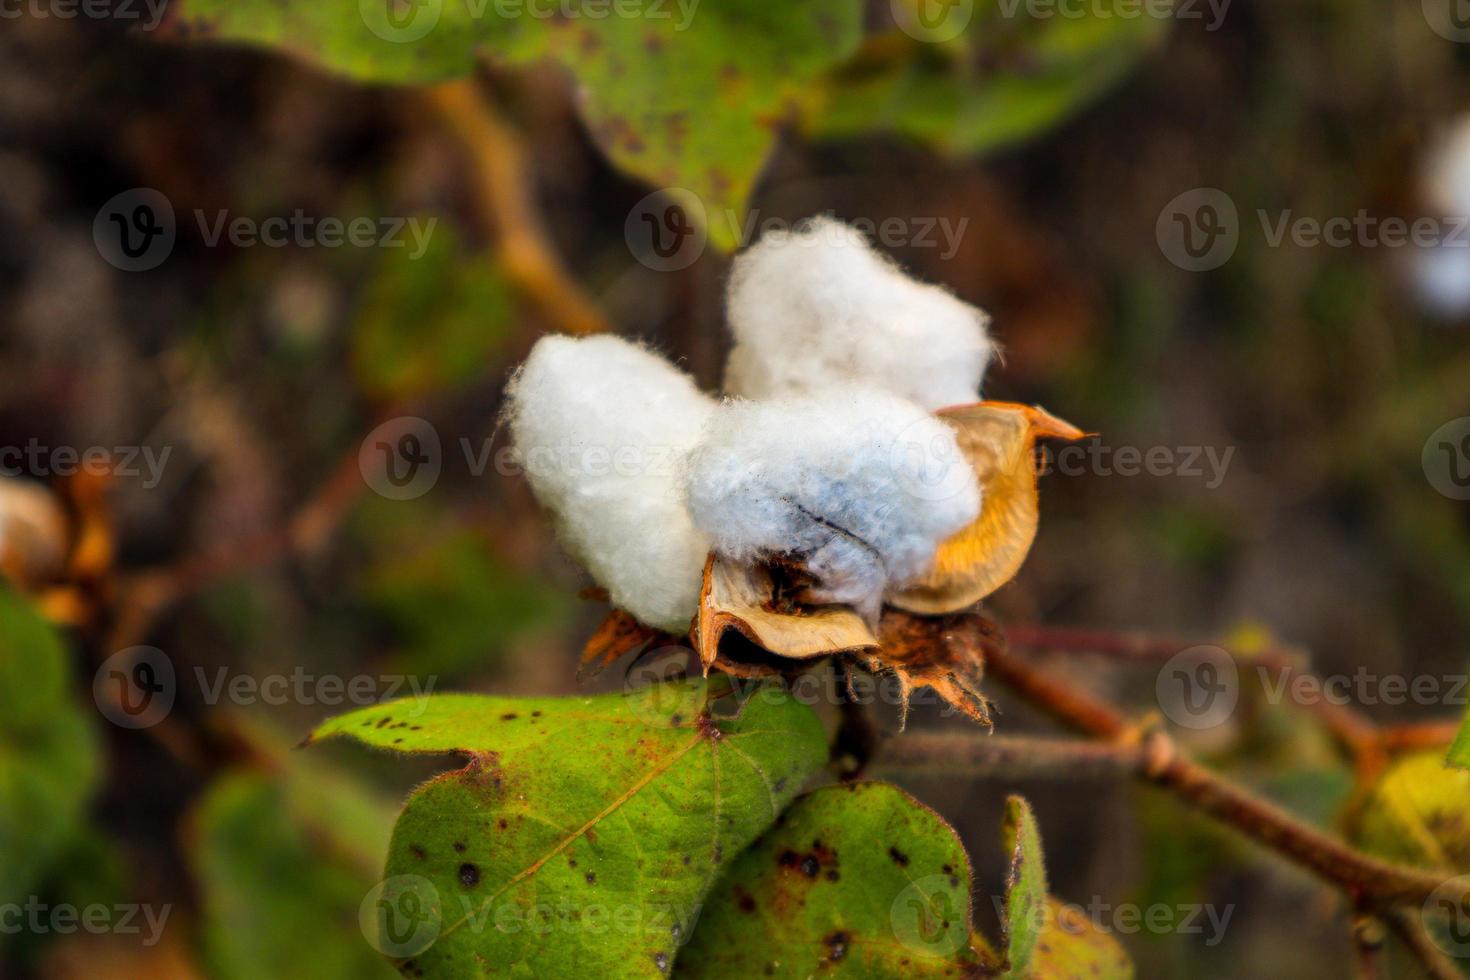 Cotton flower in the cotton flower field.As raw material Apparel, fashion clothes. photo